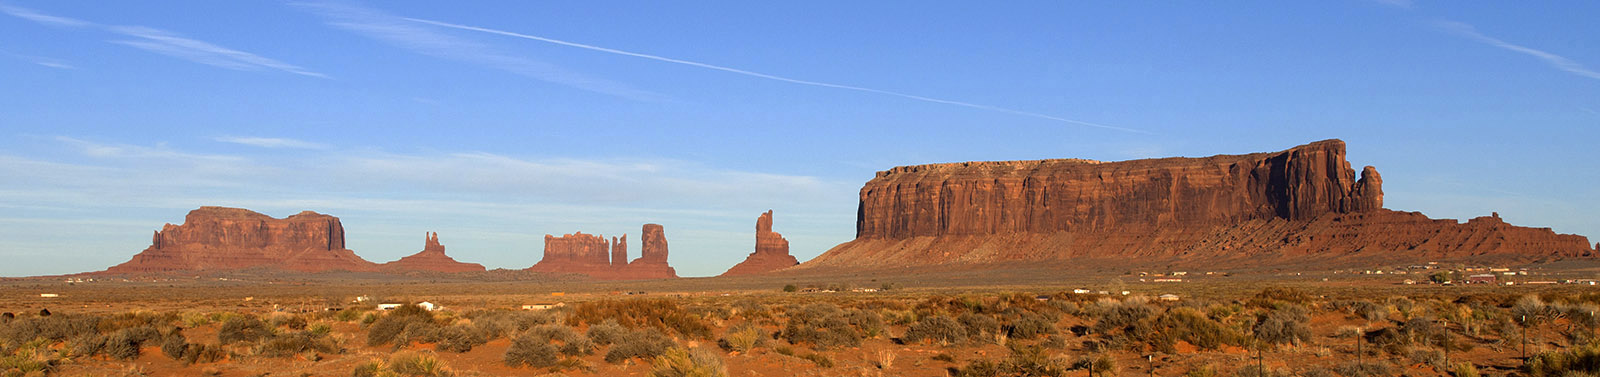 Monument Valley Arizona, Sedimentary layers of sandstone, shale and conglomerate deposited in the late Permian age were uplifted during the Laramide orogeny.  The surrounding layers have been eroded by the flows of the San Juan and Colorado rivers to leave flat-topped landforms.